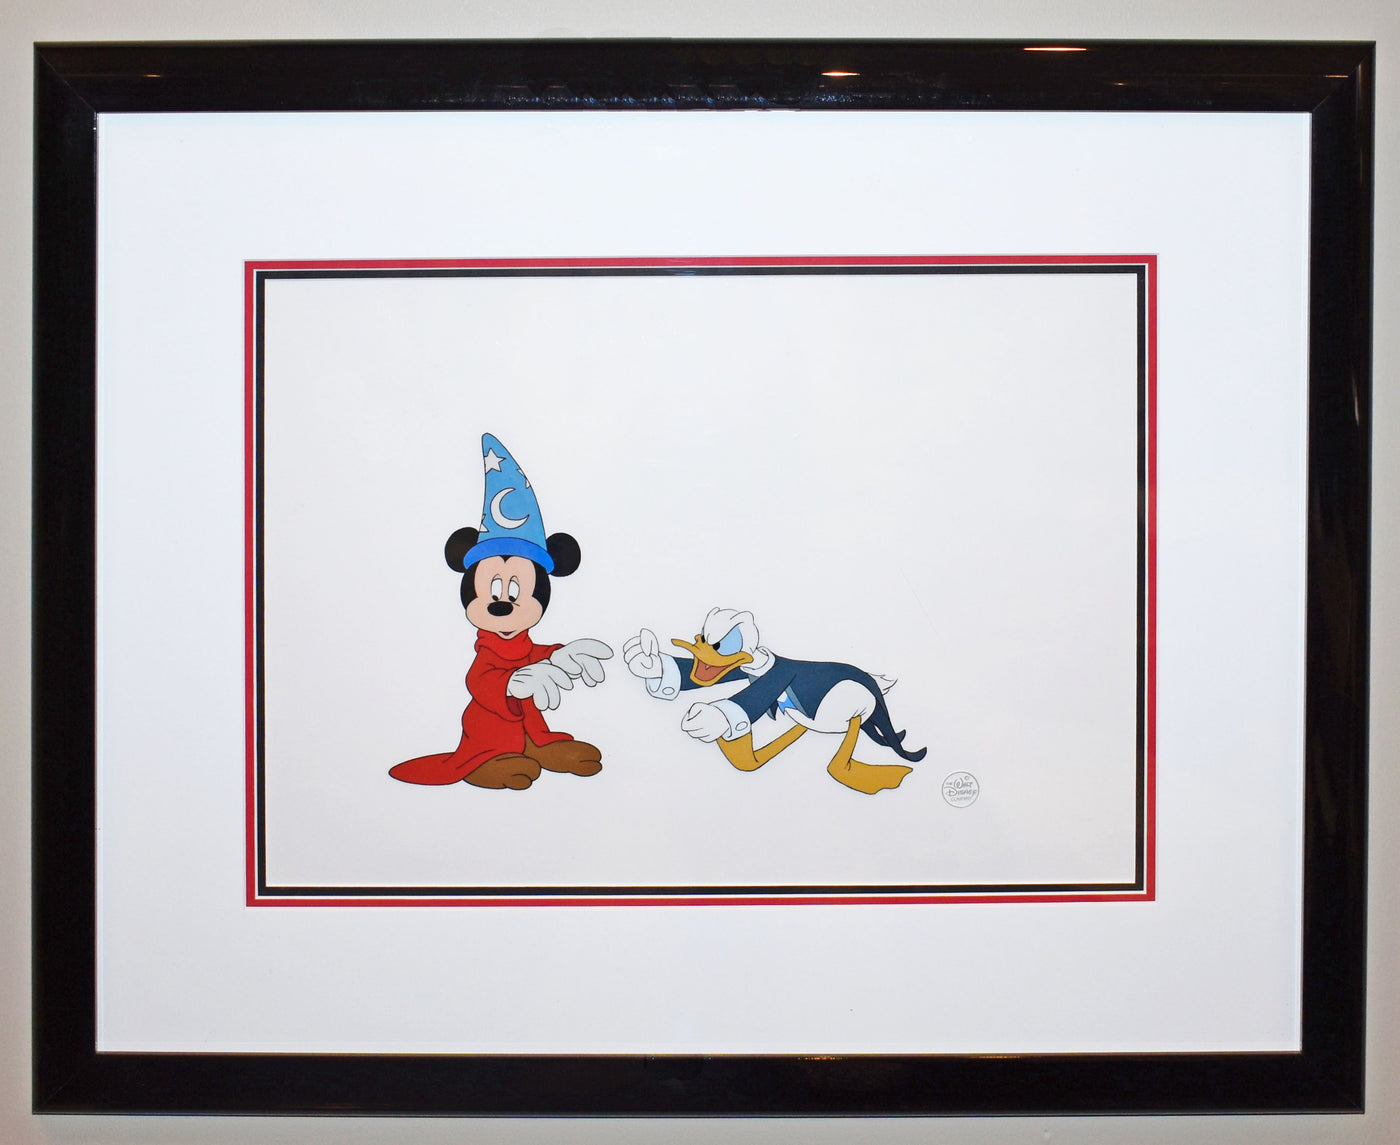 Original Walt Disney 1988 Academy Awards Production Cel featuring Donald Duck and Mickey Mouse